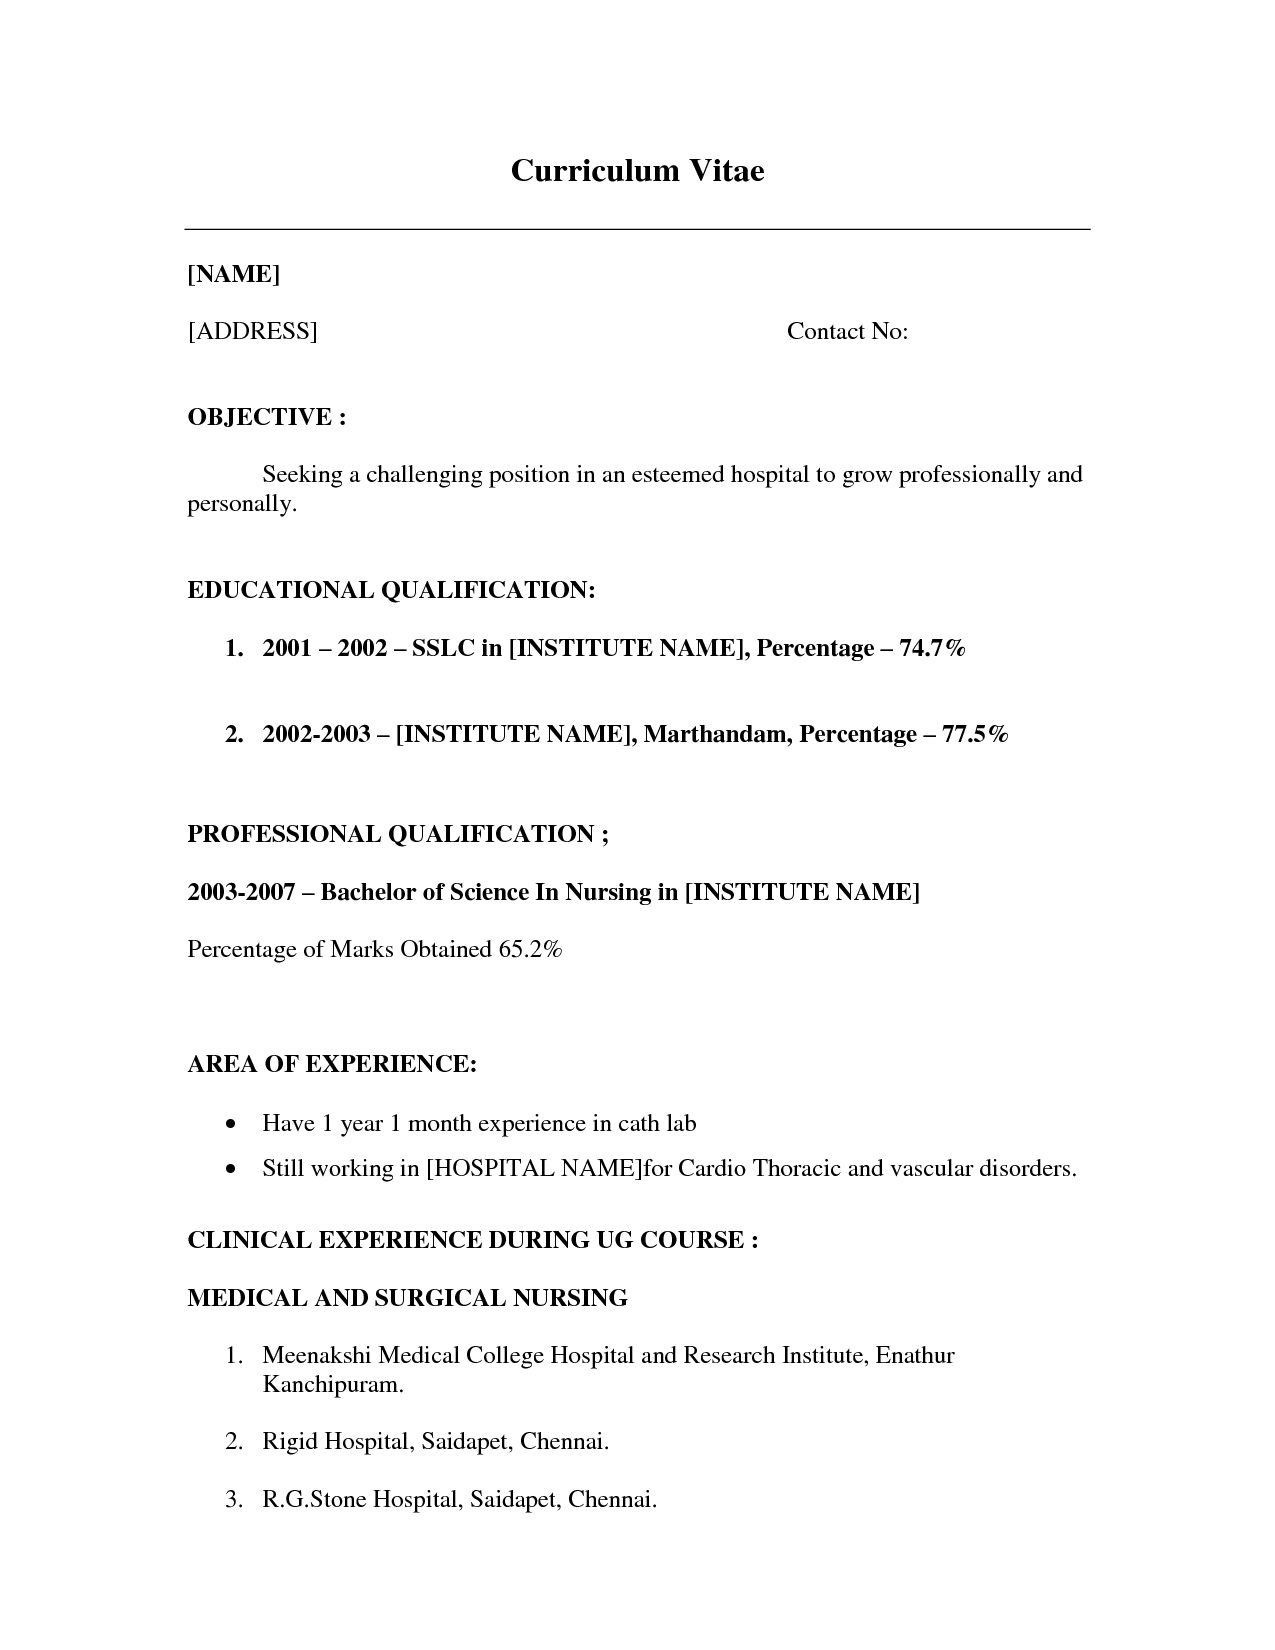 Free Resume Template for Teenager with No Experience Free Resume Templates No Work Experience – Resume Examples Job …